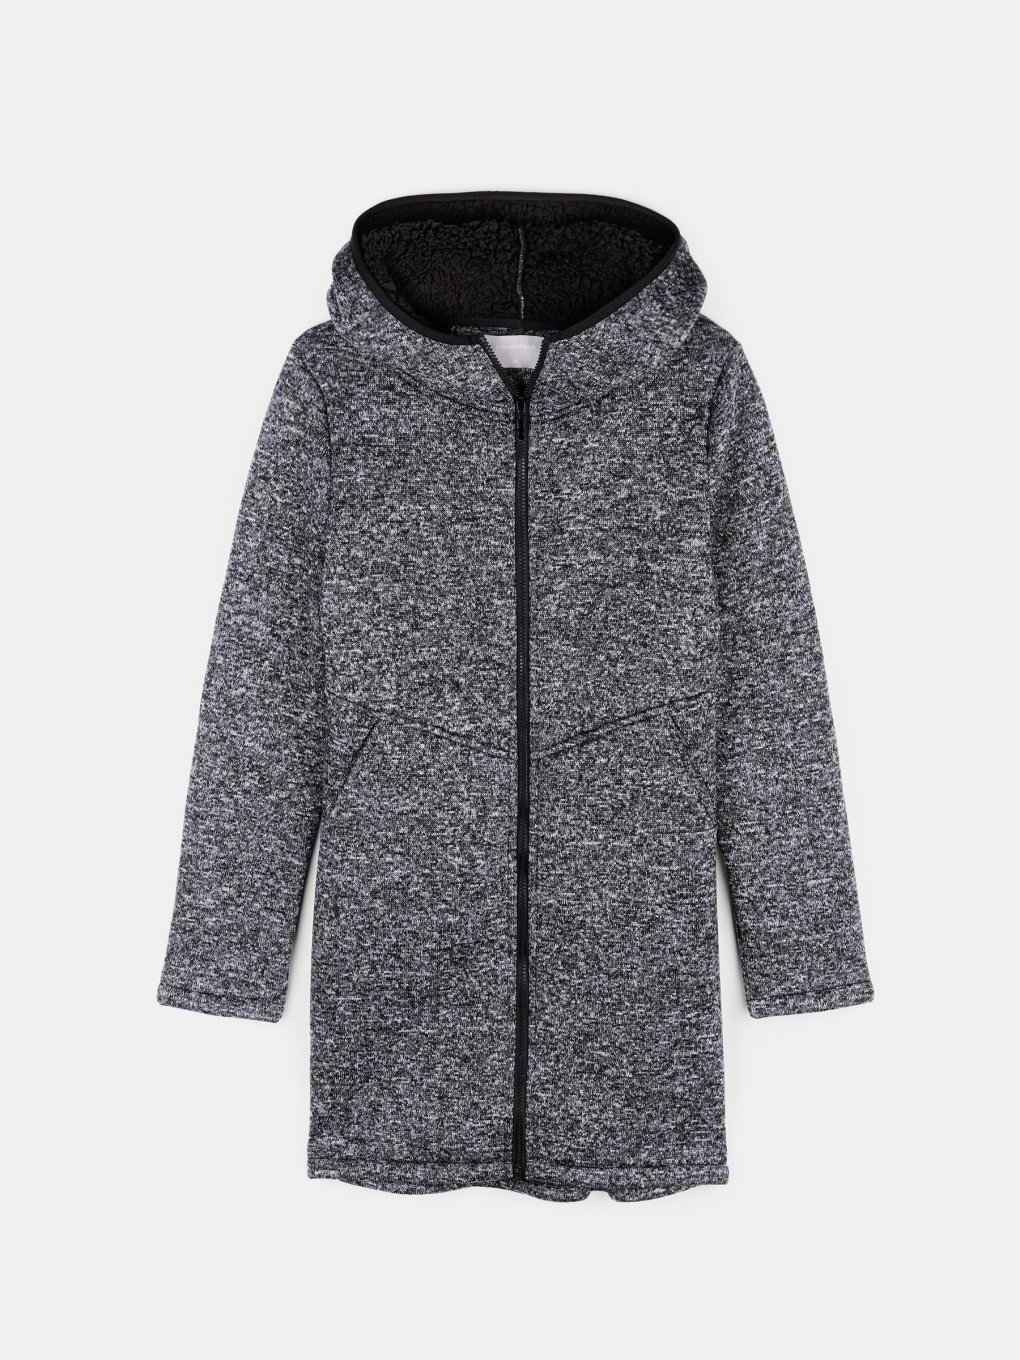 Pile lined hooded jacket